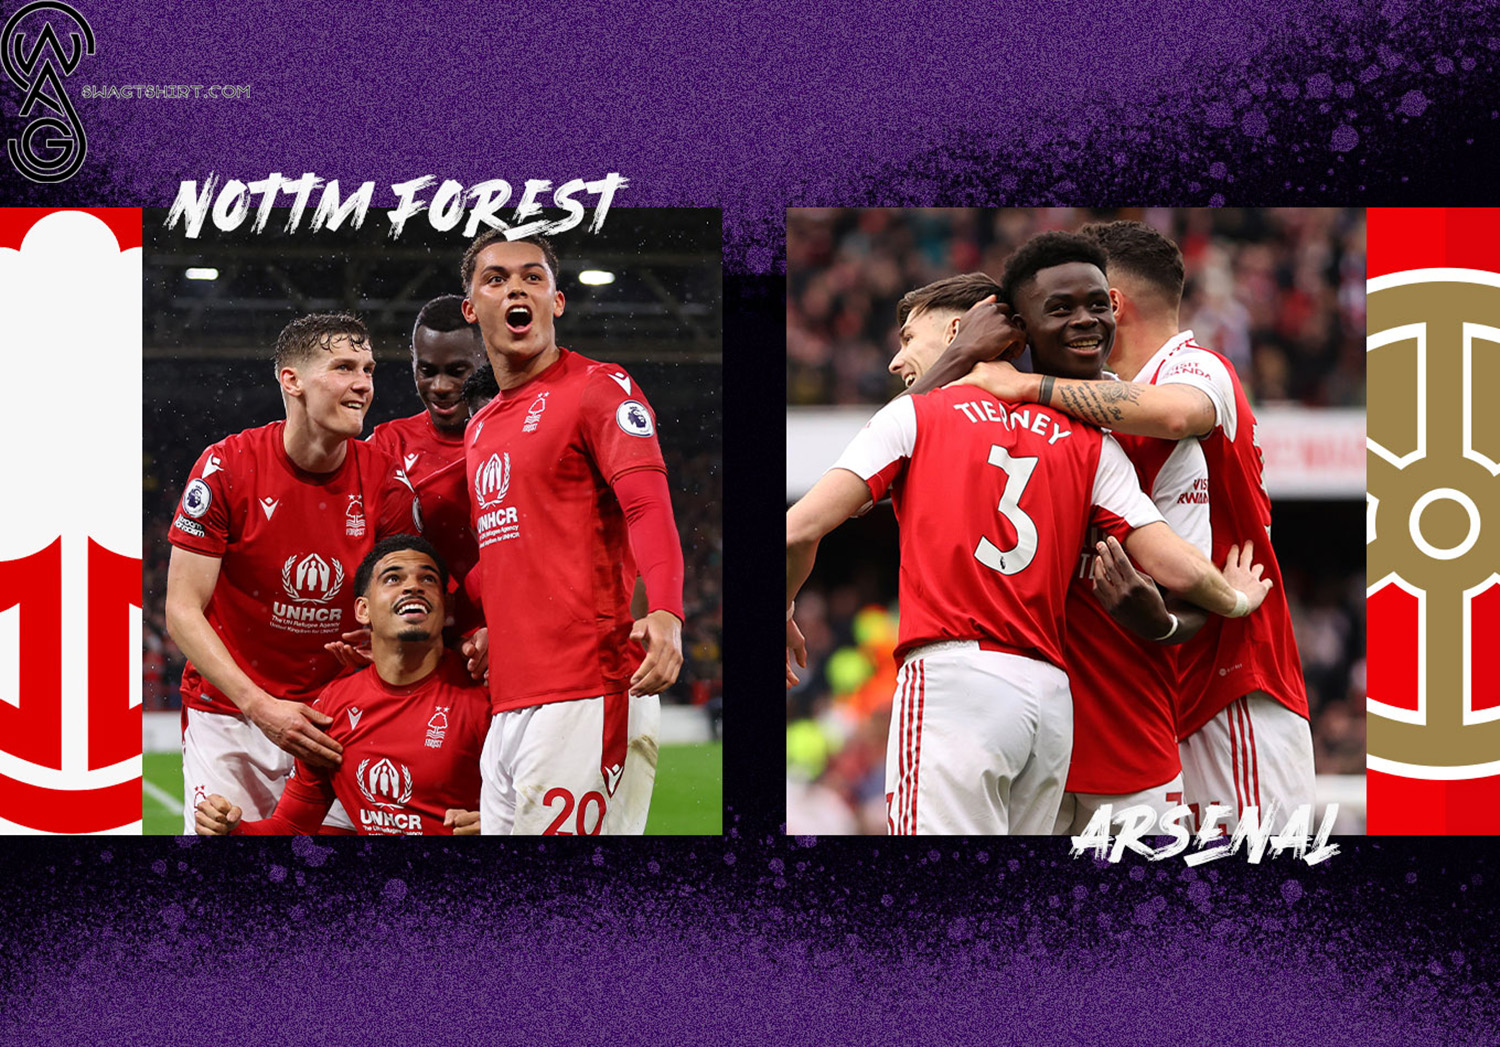 Thrilling Clash at The City Ground Nottingham Forest vs Arsenal – A Premier League Spectacle